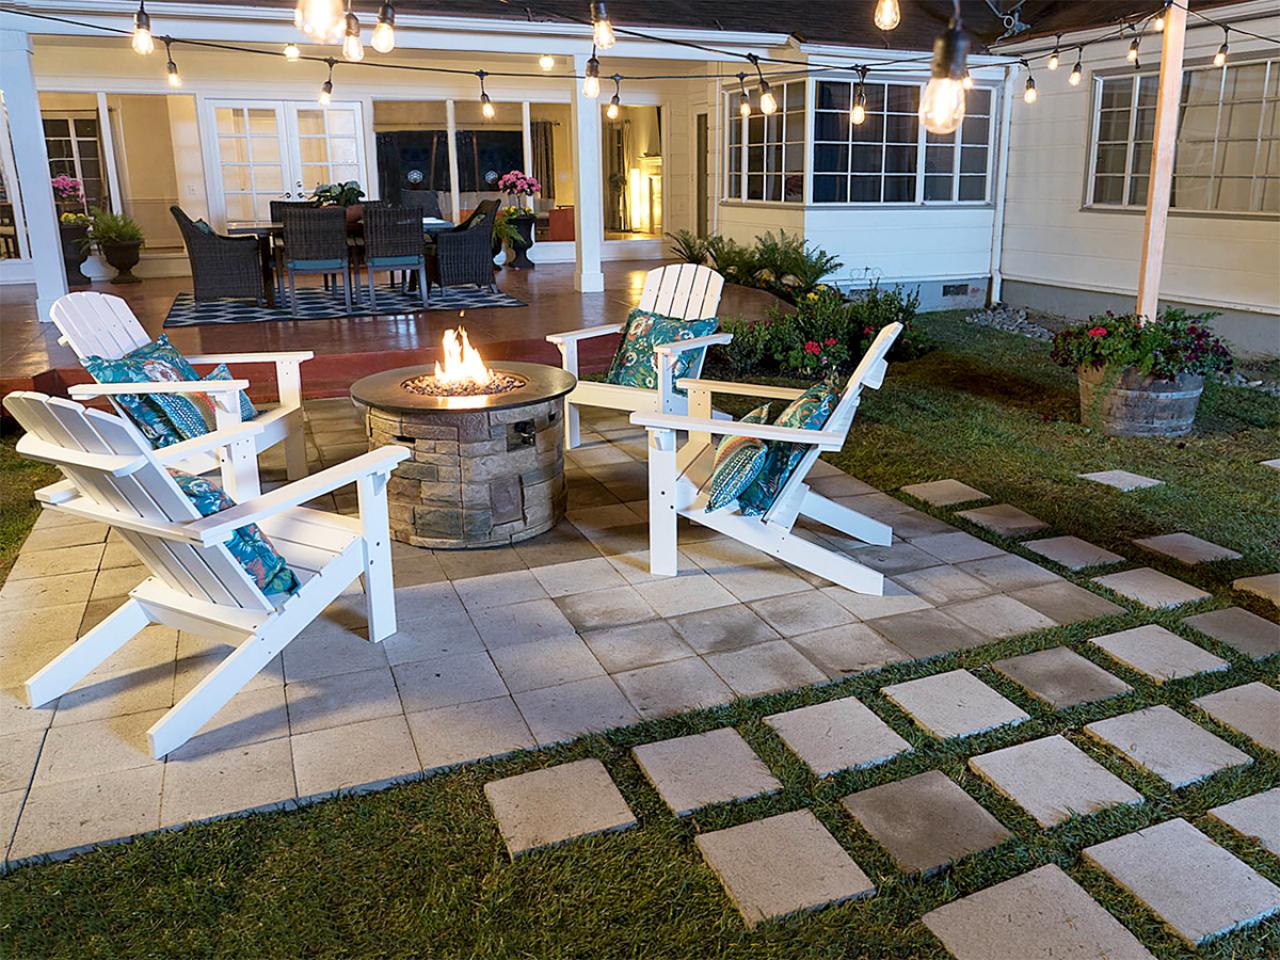 How To Lay A Paver Patio For Firepit, How To Build A Square Fire Pit With Pavers